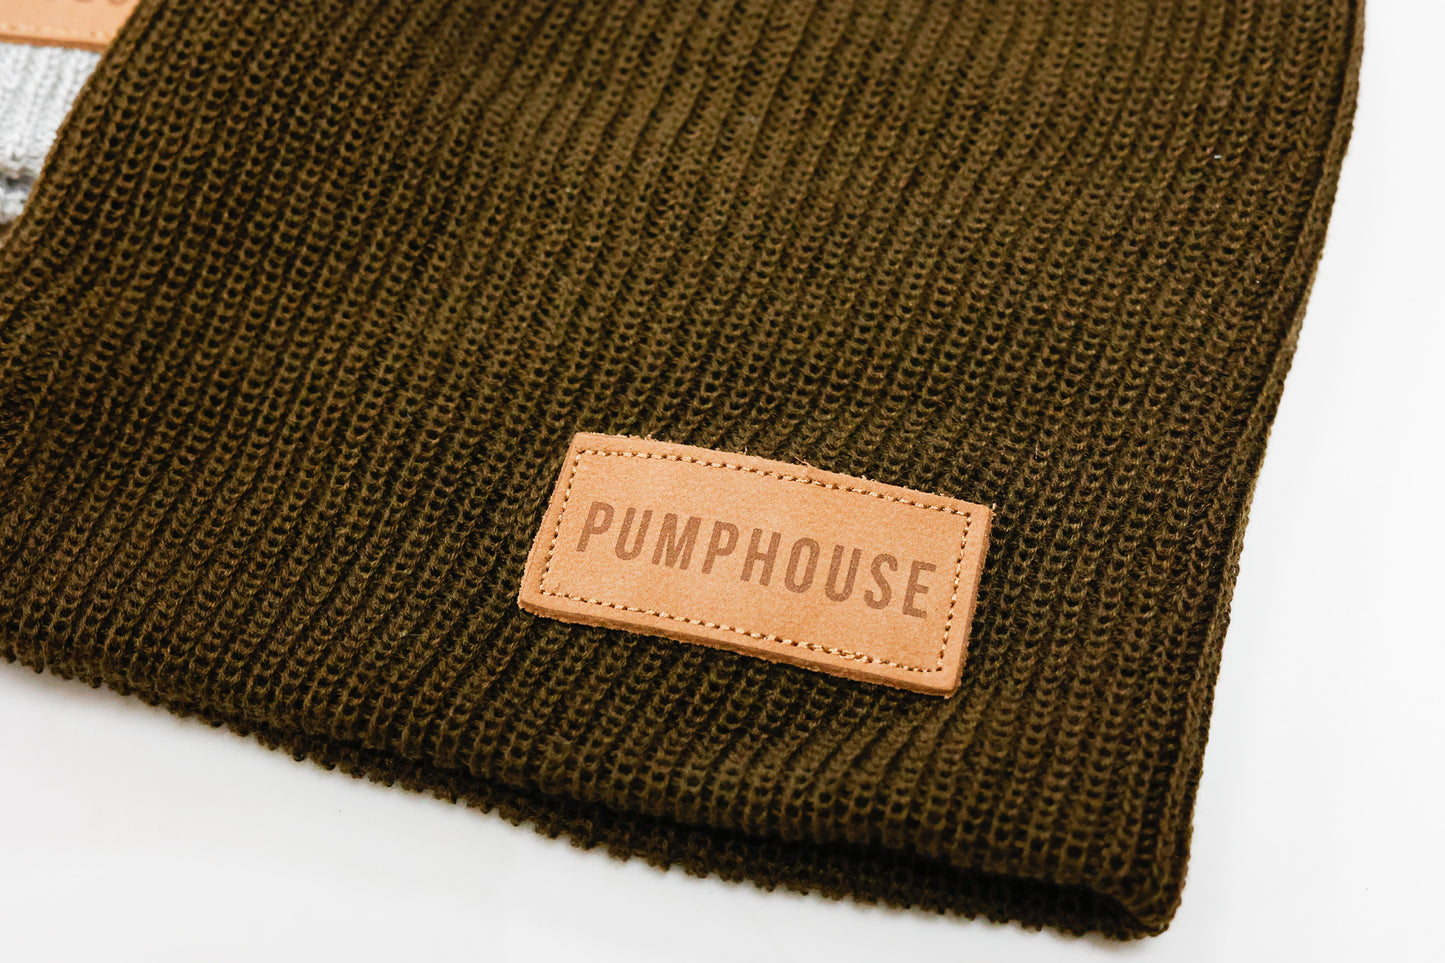 Brown Knit Hat with Pumphouse Leather Patch